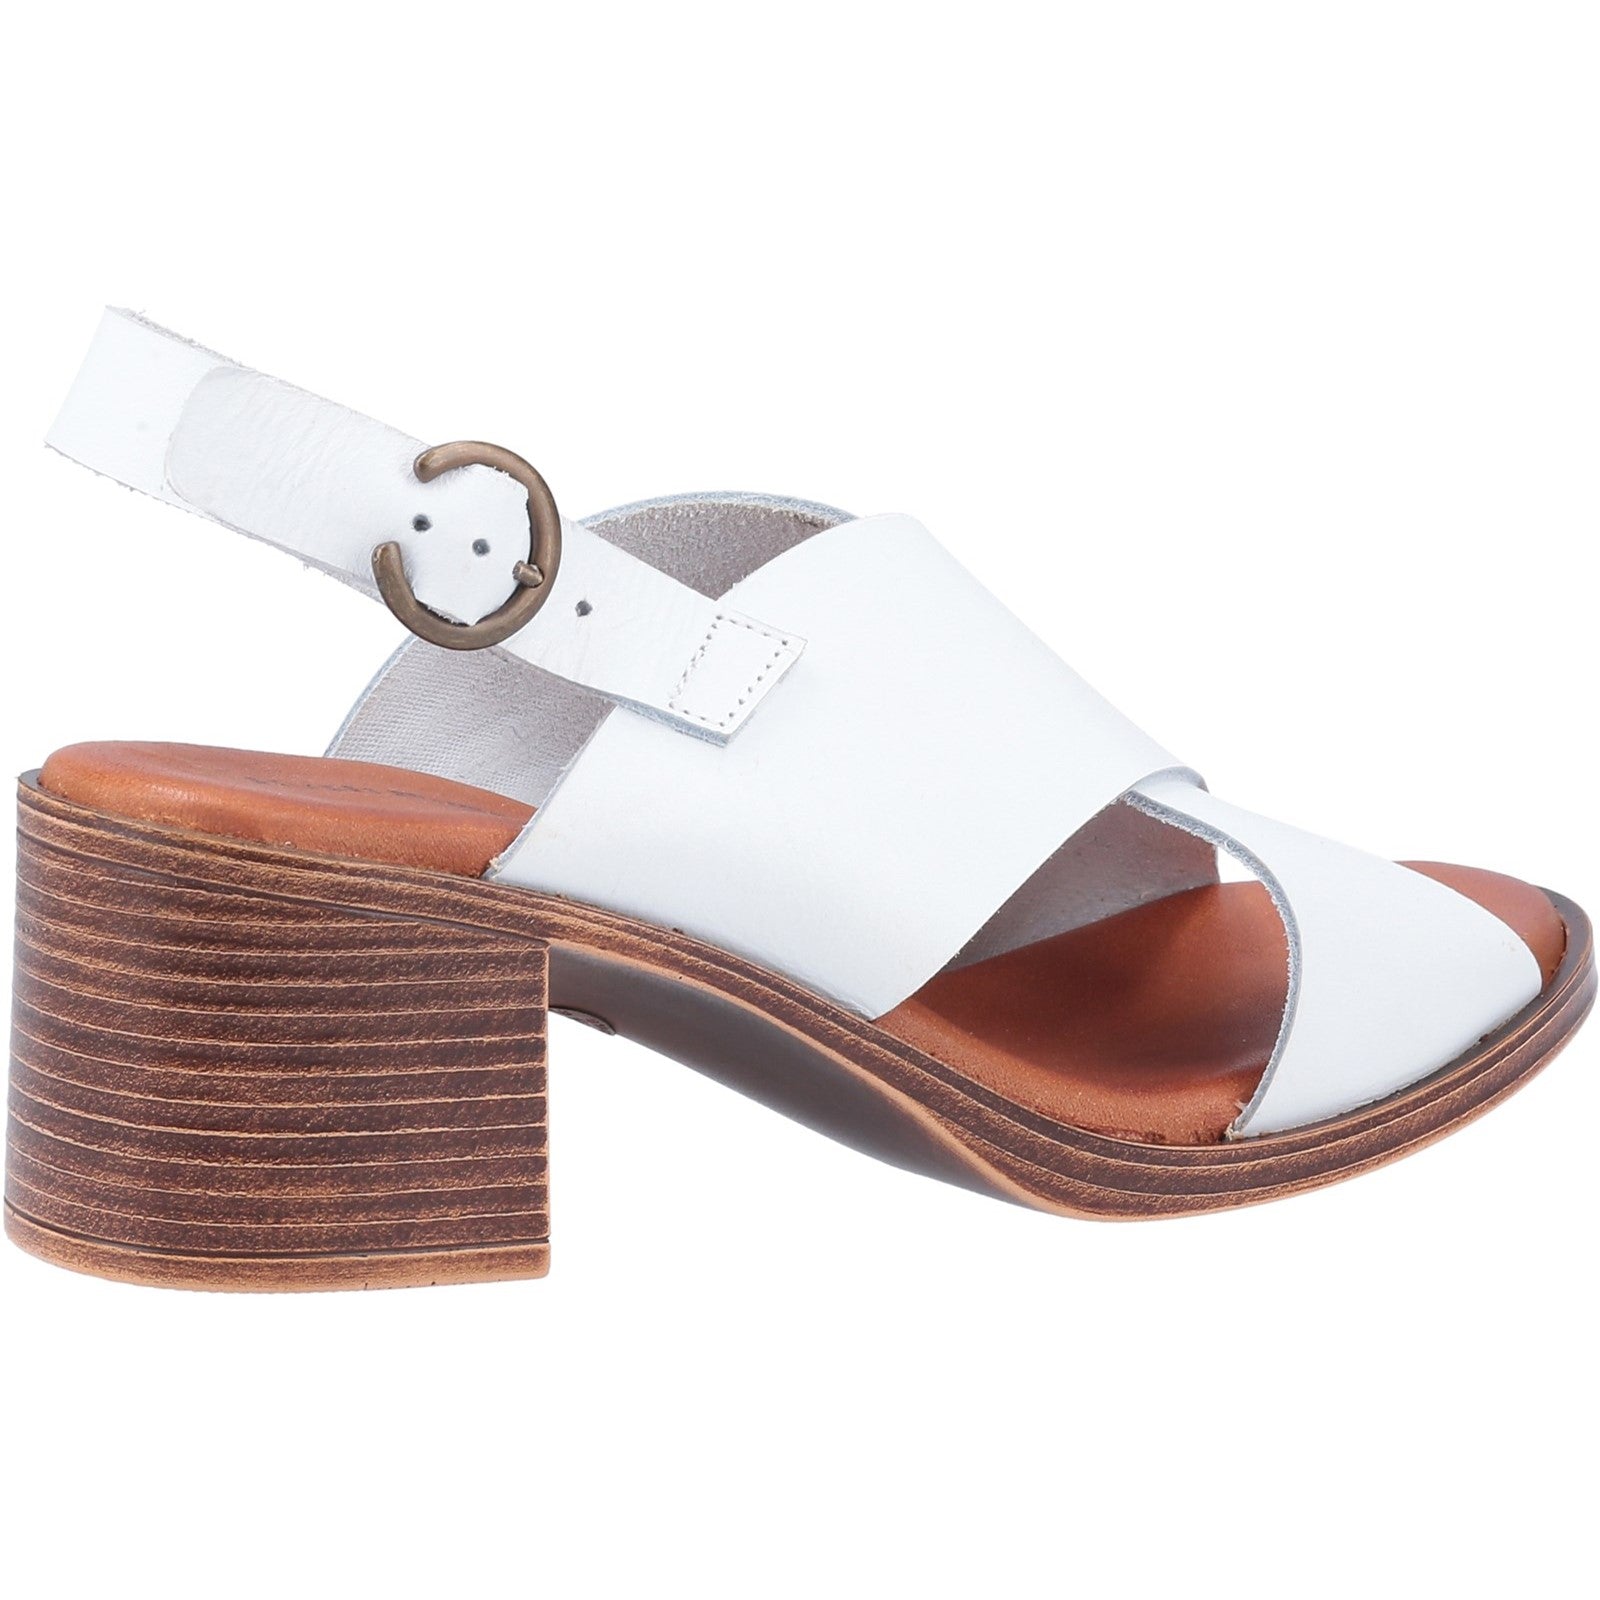 Hush Puppies Womens Gabrielle Leather Sandal - White